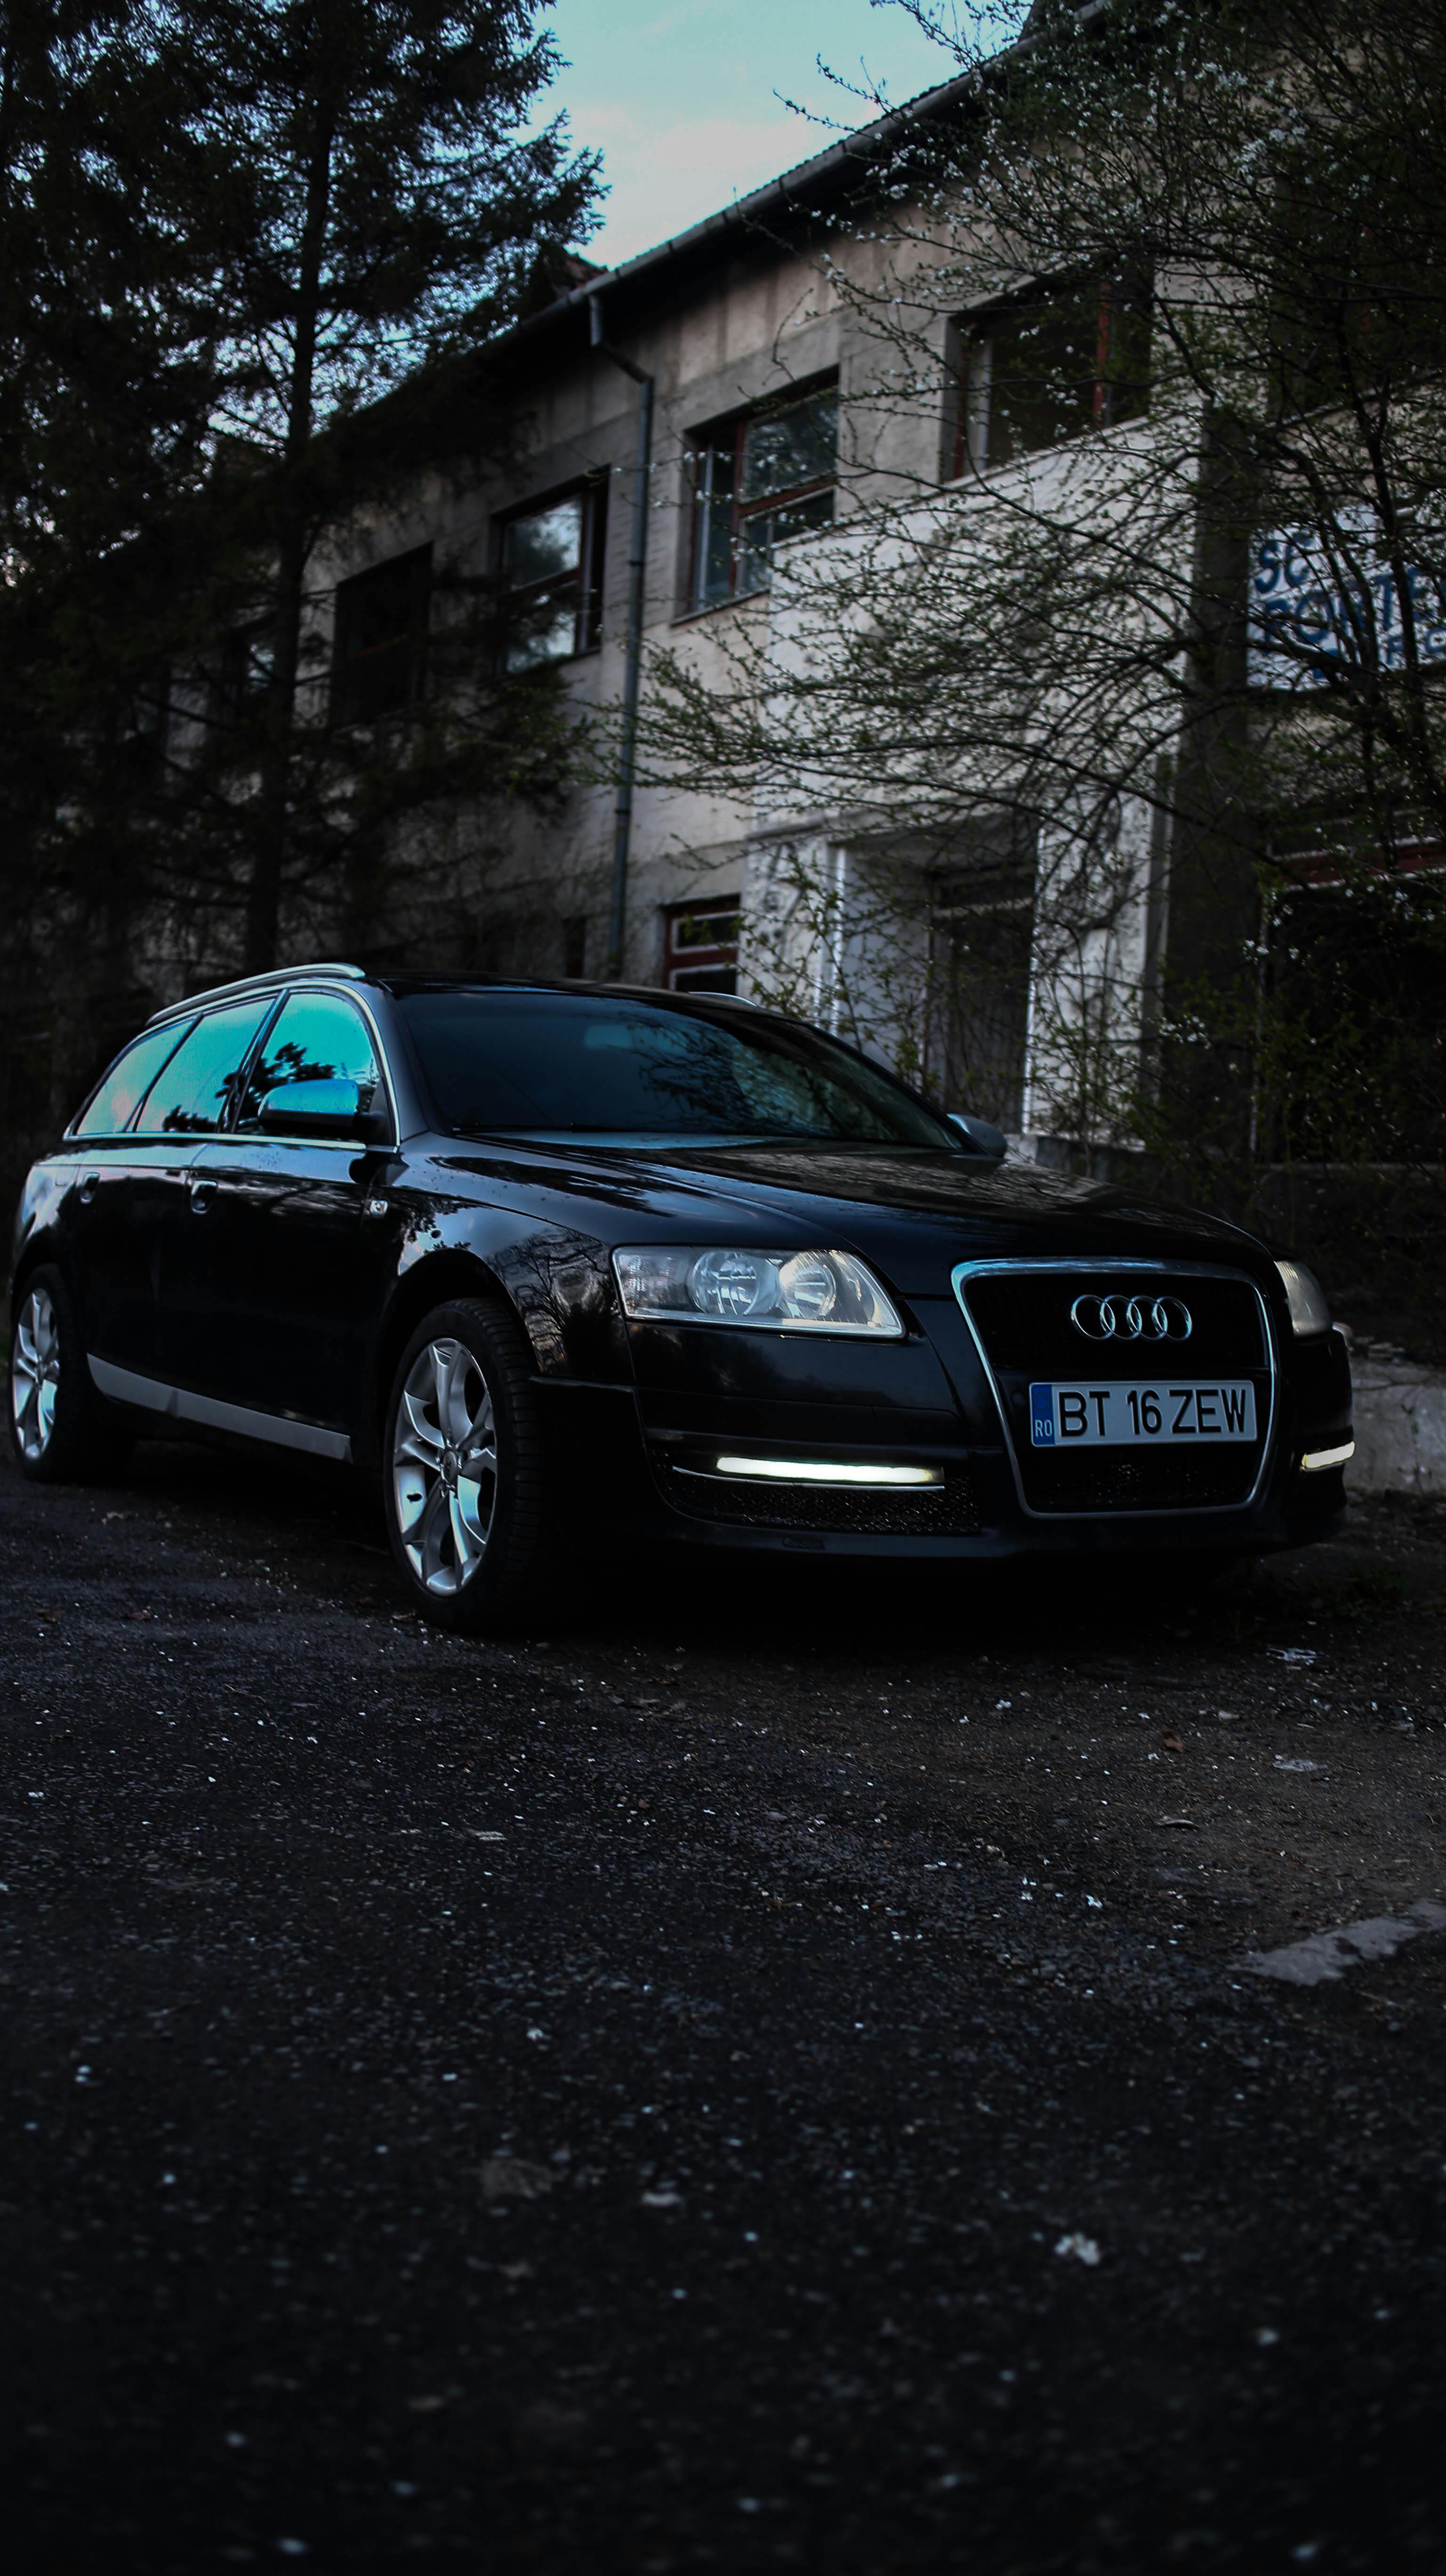 Black Audi Coupe Parked on the Street · Free Stock Photo